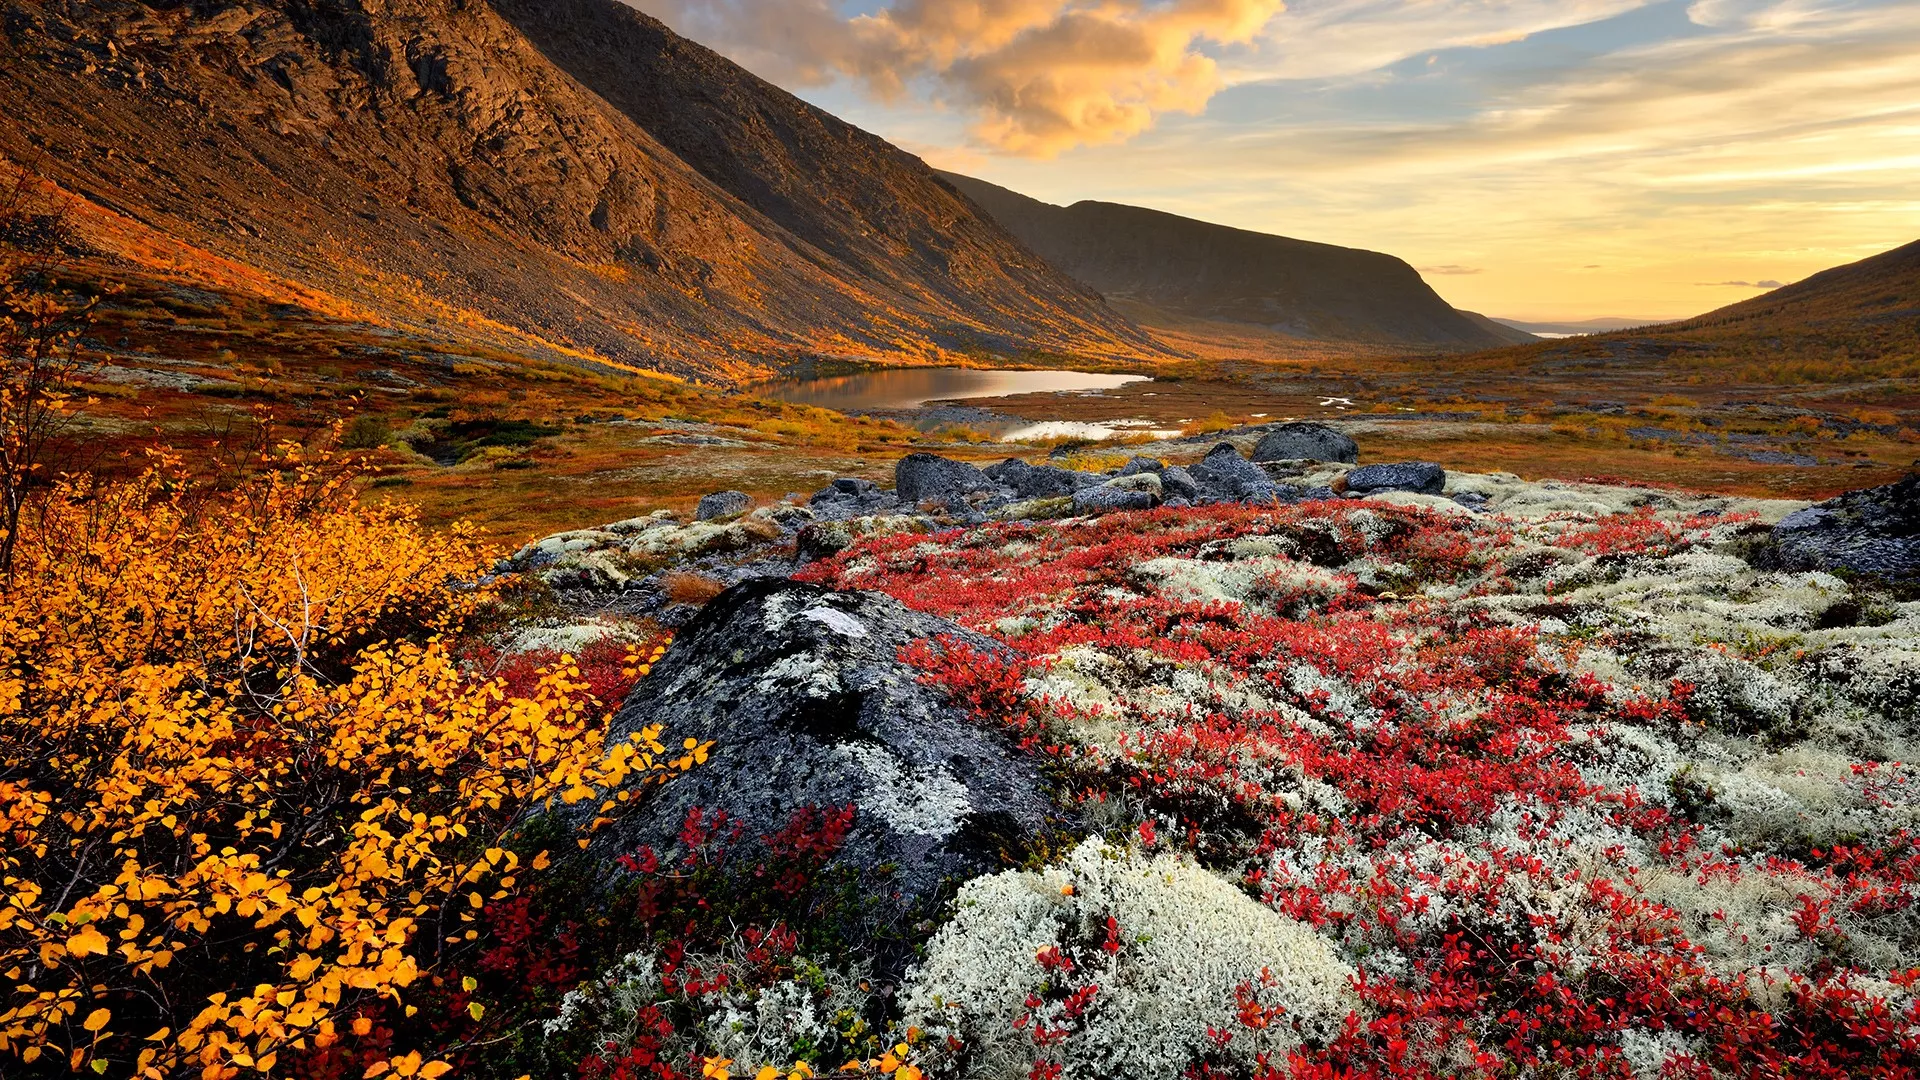 Khibiny Mountains in Russia, Europe | Trekking & Hiking - Rated 0.9